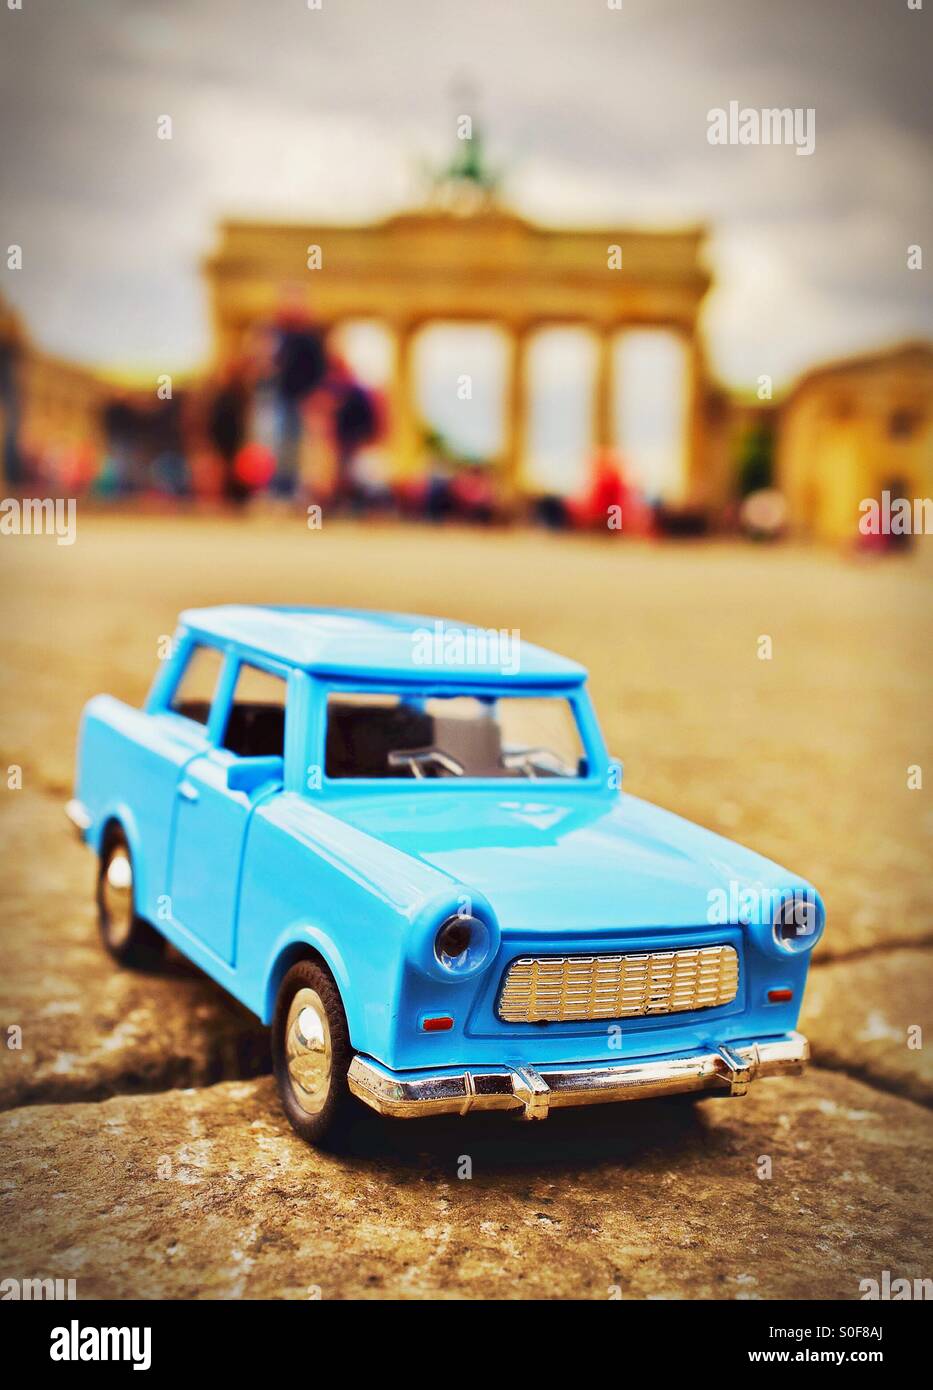 Iconic Berlin - a toy Trabant car in front of The Brandenburg Gate in Berlin Germany EU Stock Photo